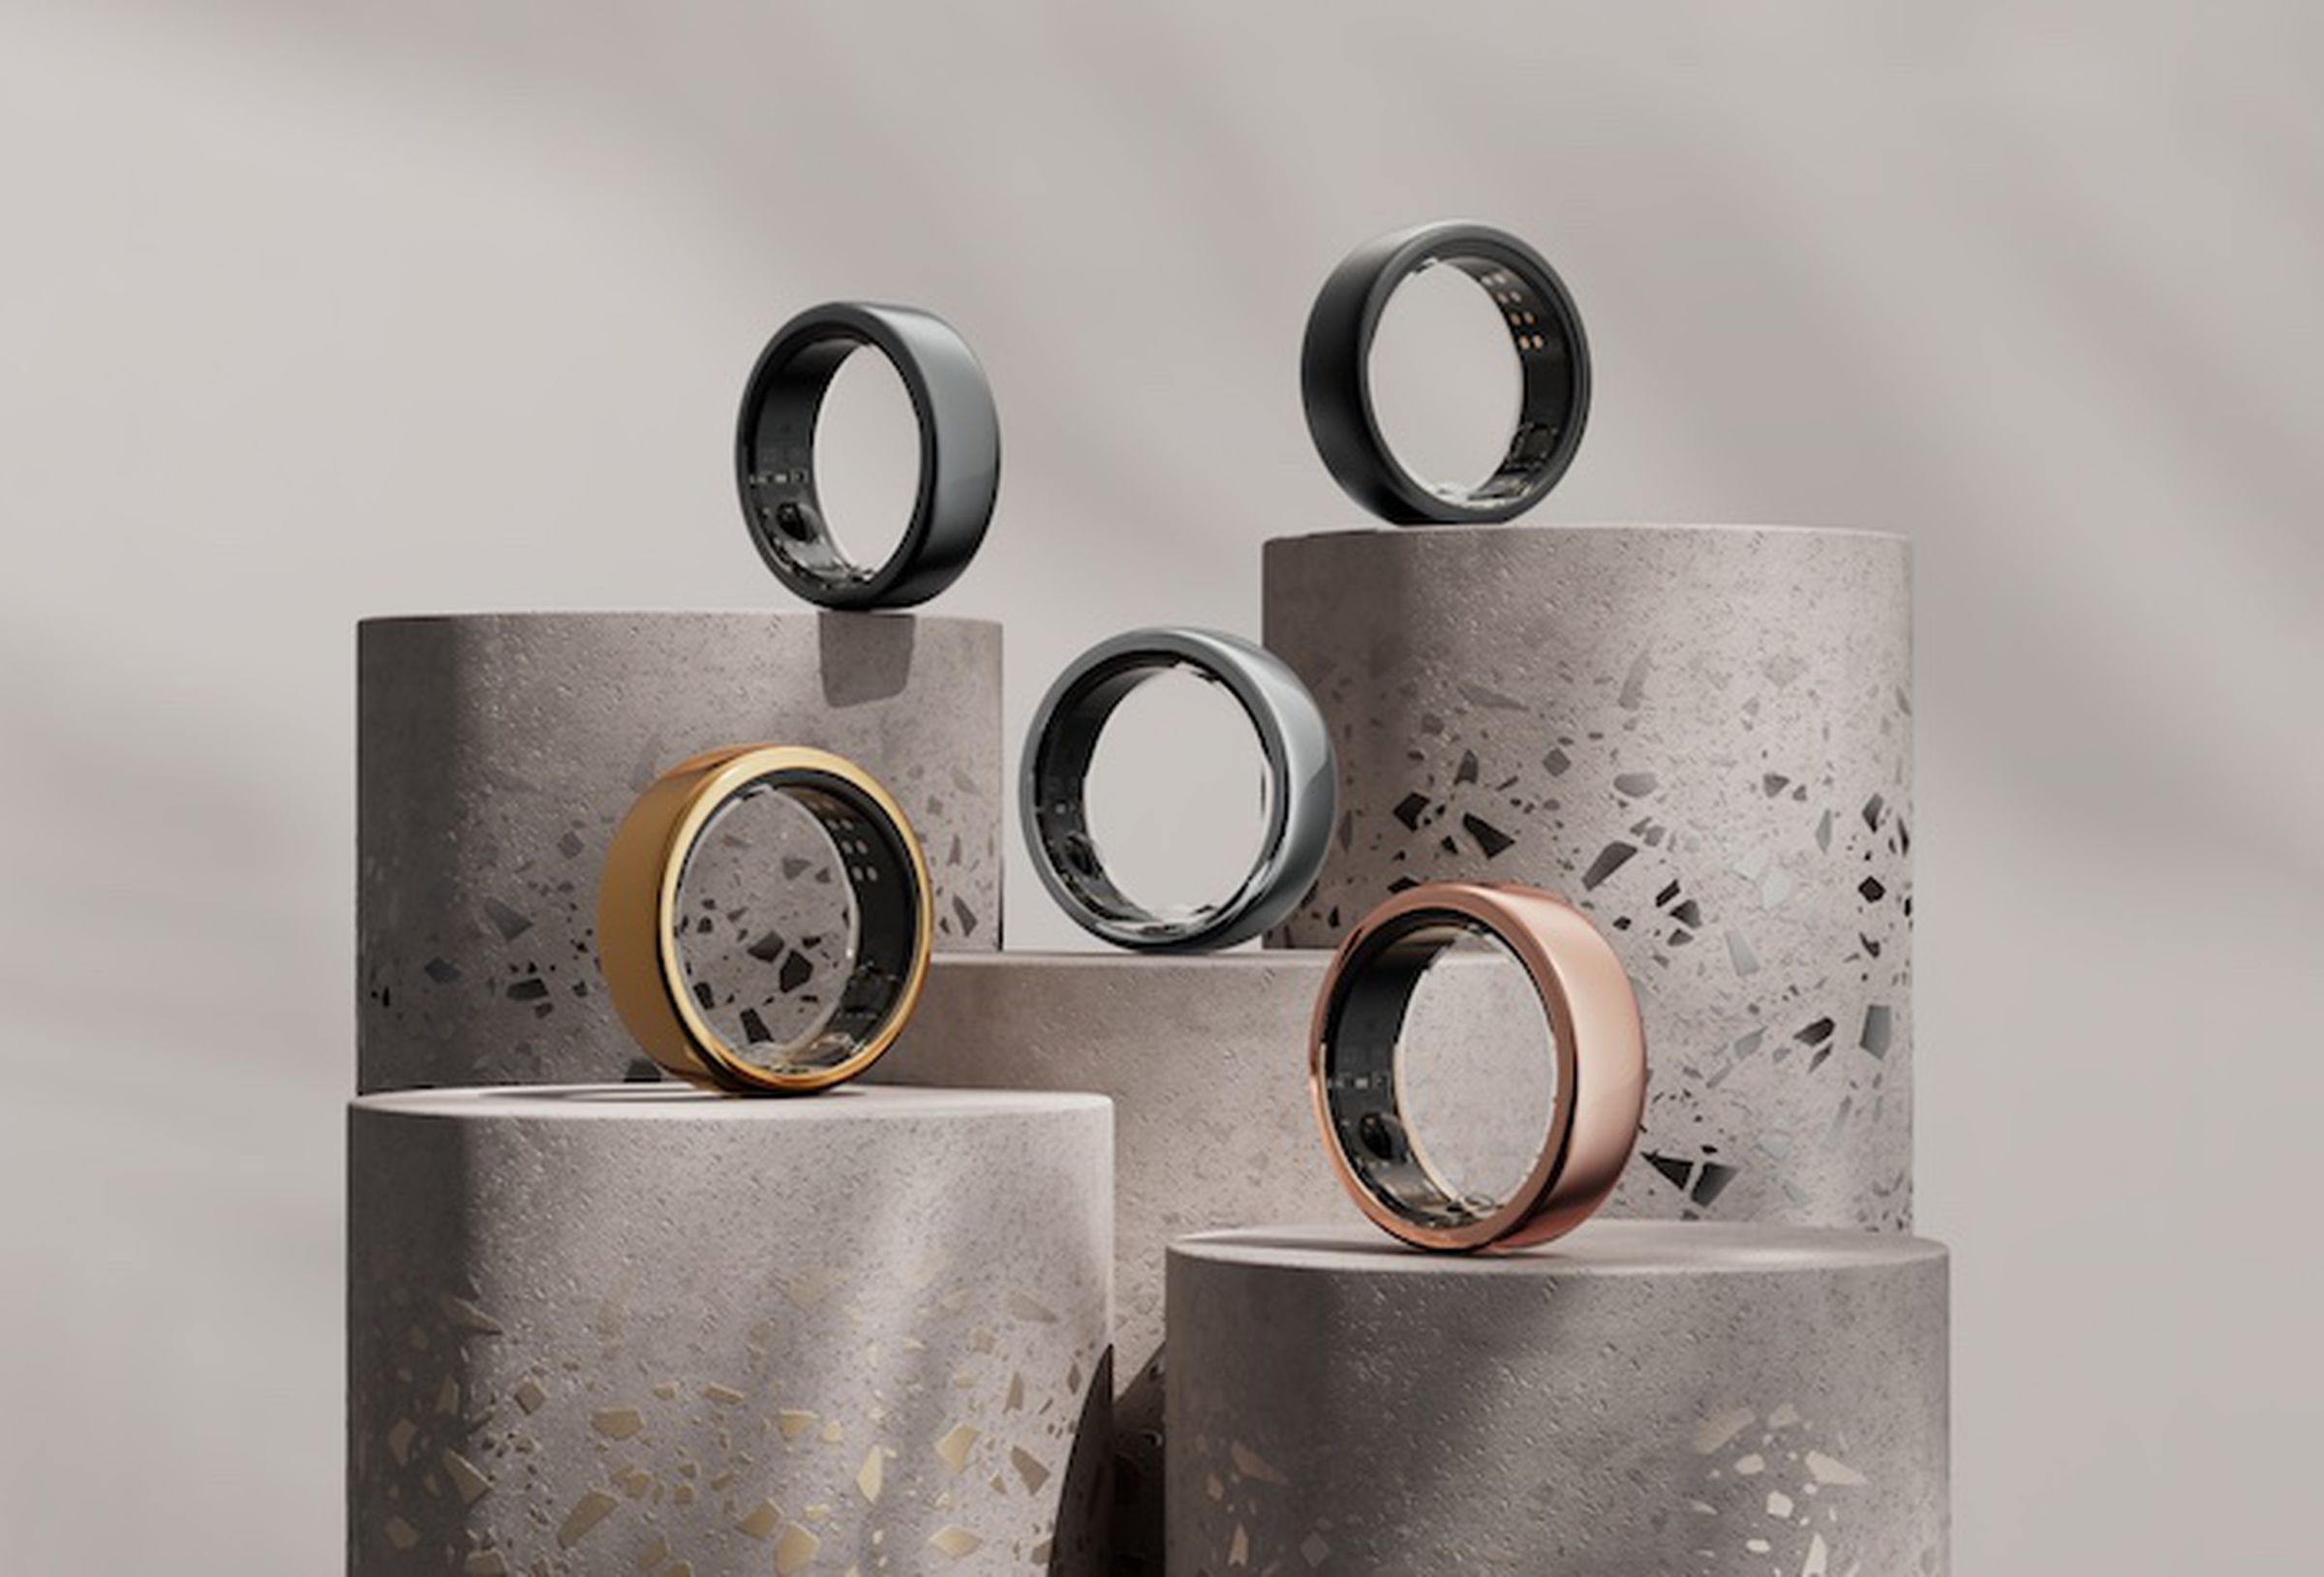 A collection of five Oura smart rings are arranged on concrete pedestals of varying heights. There’s a glossy gold ring, a rosy gold ring, a silver one in the center, a gunmetal gray one, and a matte black one.